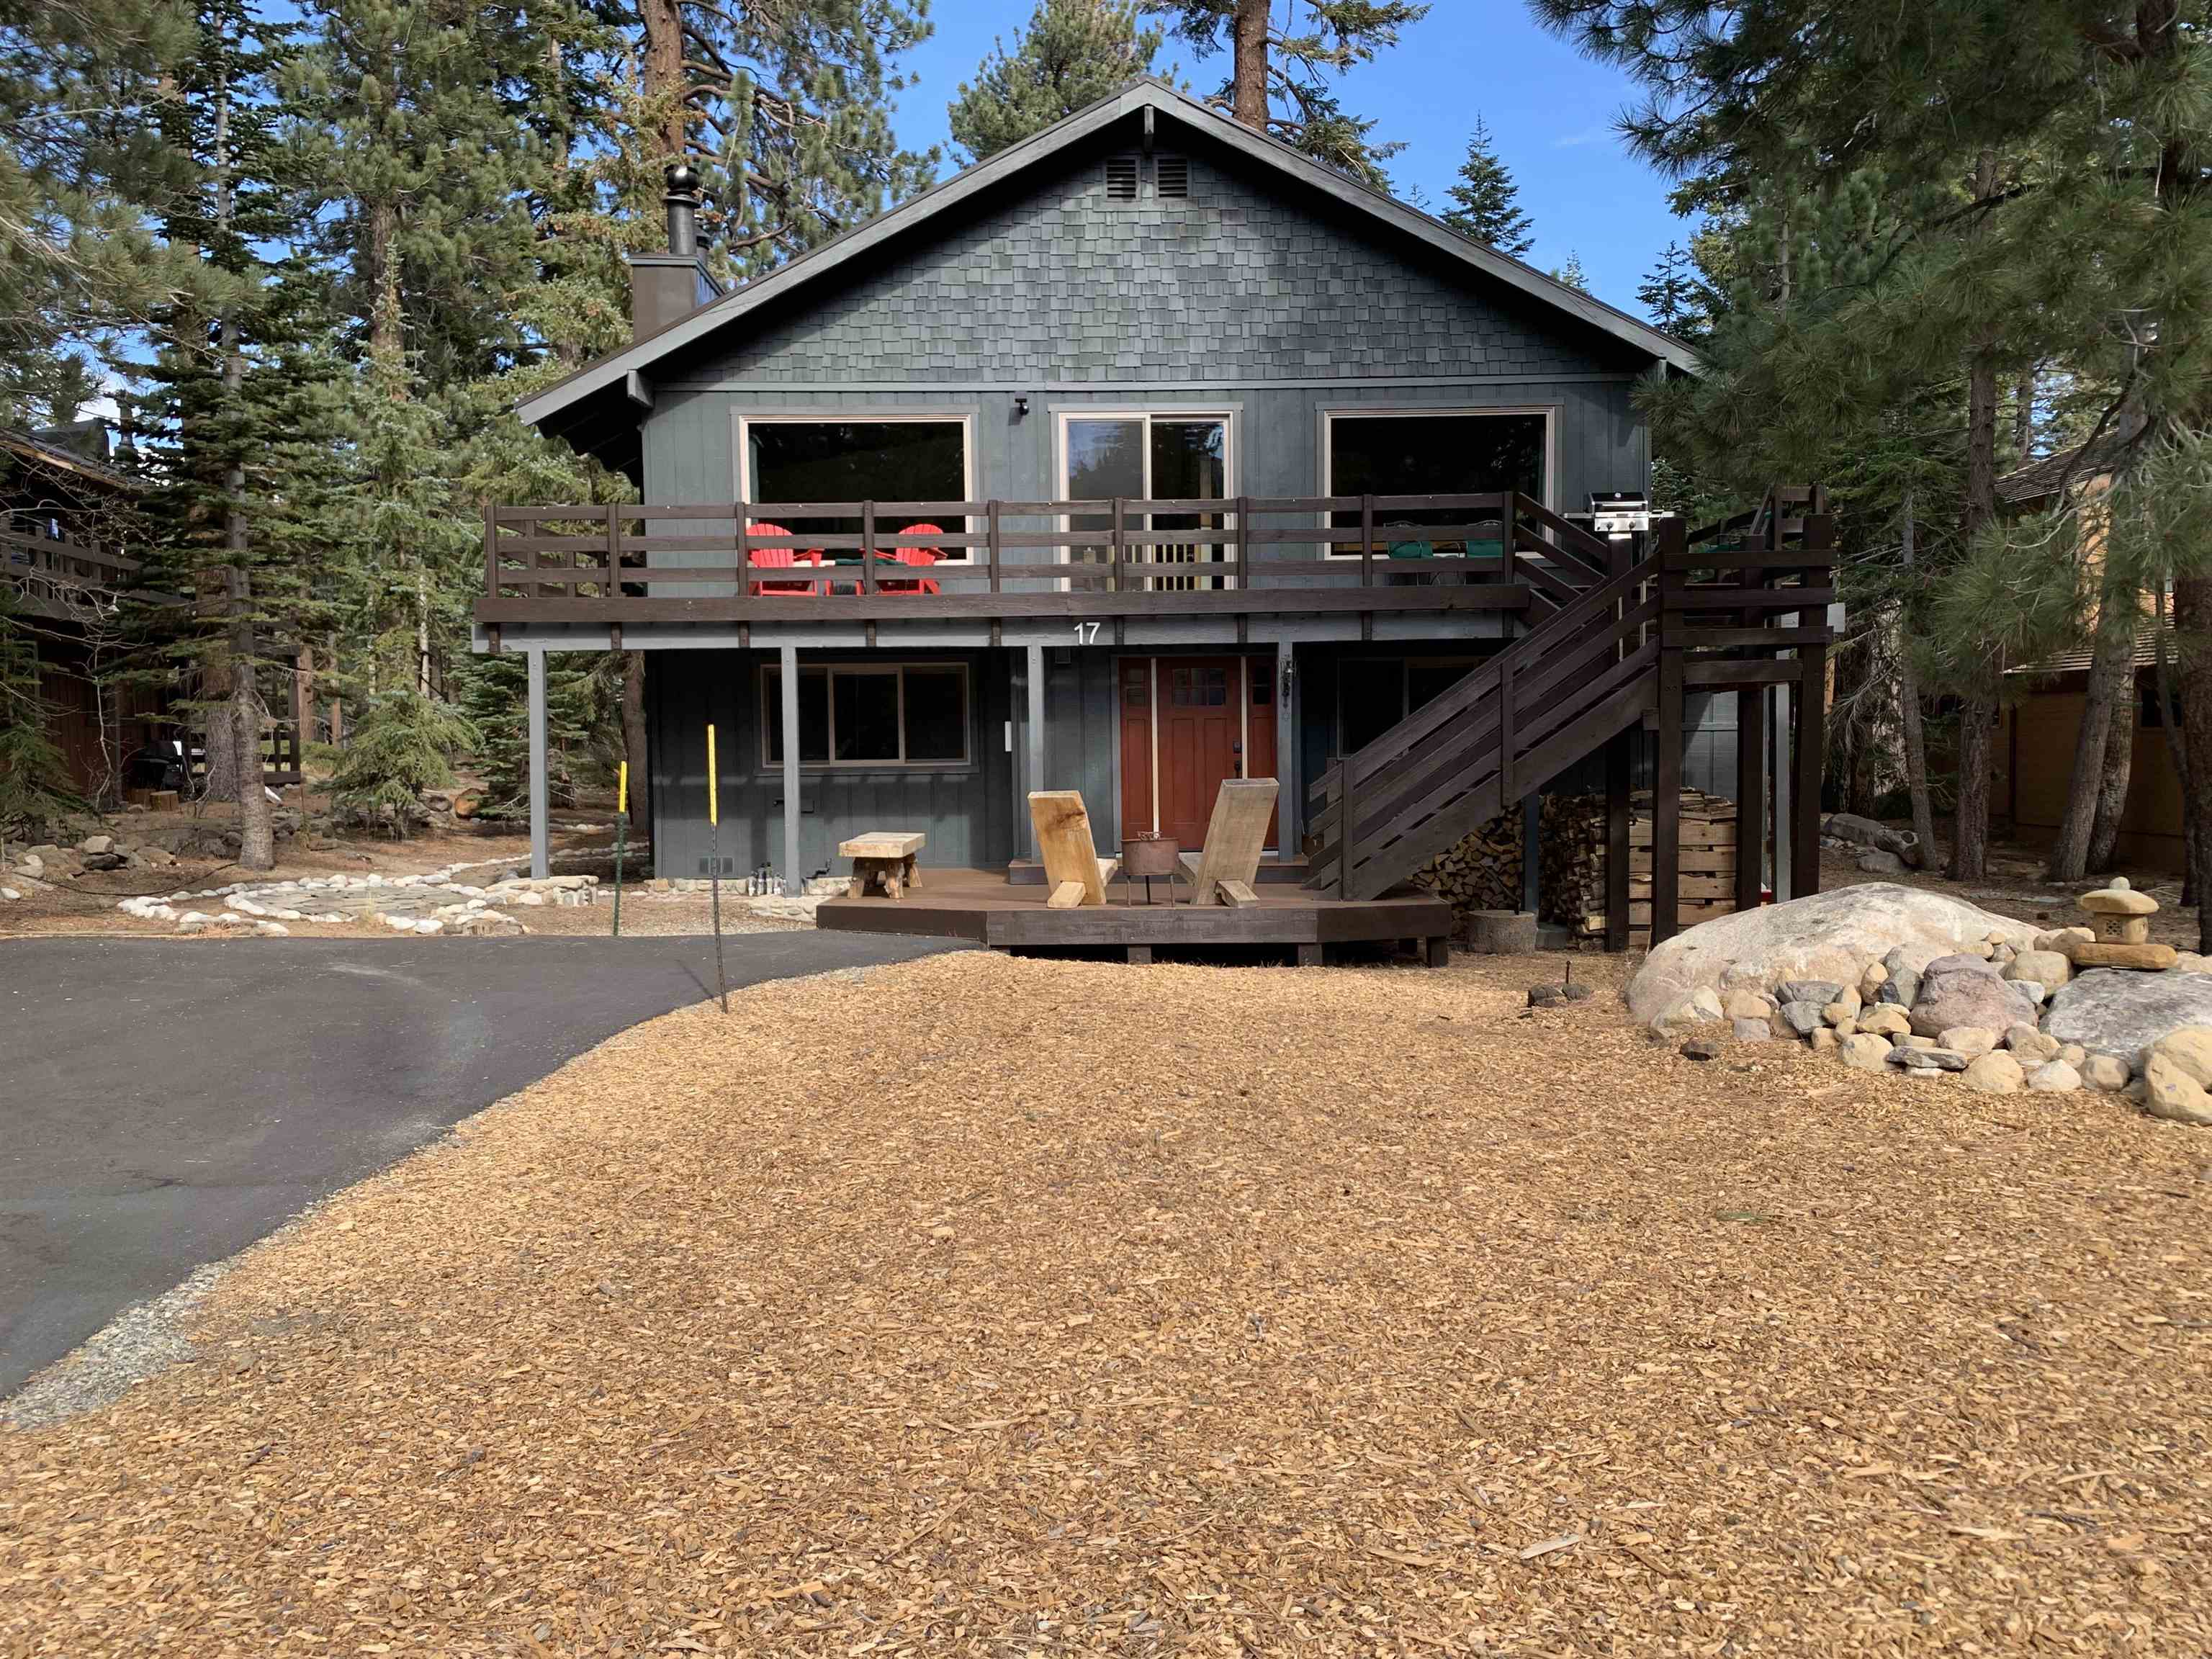 Located in the beautiful Majestic Pines neighborhood near Eagle Lodge - this move-in ready 3 bedroom, 2 bathroom home with a 2 car garage has TWO driveways on a flat lot.  Tons of parking! 5 minute walk to Eagle Lodge or hop on the free ski shuttle (shuttle stop is right next door) and then ski back home through Camp High Sierra. RV parking on East side of home. Trail access from this home is perfect for hiking, mountain biking and trail running. Only a 6 minute drive to the Lakes Basin. First floor has two bedrooms, one bathroom, laundry/utility room and access to the garage. Second floor has the primary bedroom with huge walk in closet with barn door and bathroom, open layout with living room, kitchen and dining, and access to the sunny, south facing Trex deck. Woodstove insert in the living room and brand new pellet stove downstairs, in addition to forced air heating, keeps this home cozy in the winter. New metal roof installed in 2020. South side driveway replaced in 2021. New LVP flooring downstairs and wide plank oak flooring and cork upstairs. Both bathrooms have been remodeled with new cabinets, flooring, sinks, toilets, showers and lighting. All new appliances in the kitchen. New garage doors and openers. New front door and slider door. All new interior solid alder wood doors. All new vinyl windows and many more upgrades. List of upgrades in associated docs. Be sure to check out the Virtual Tour.